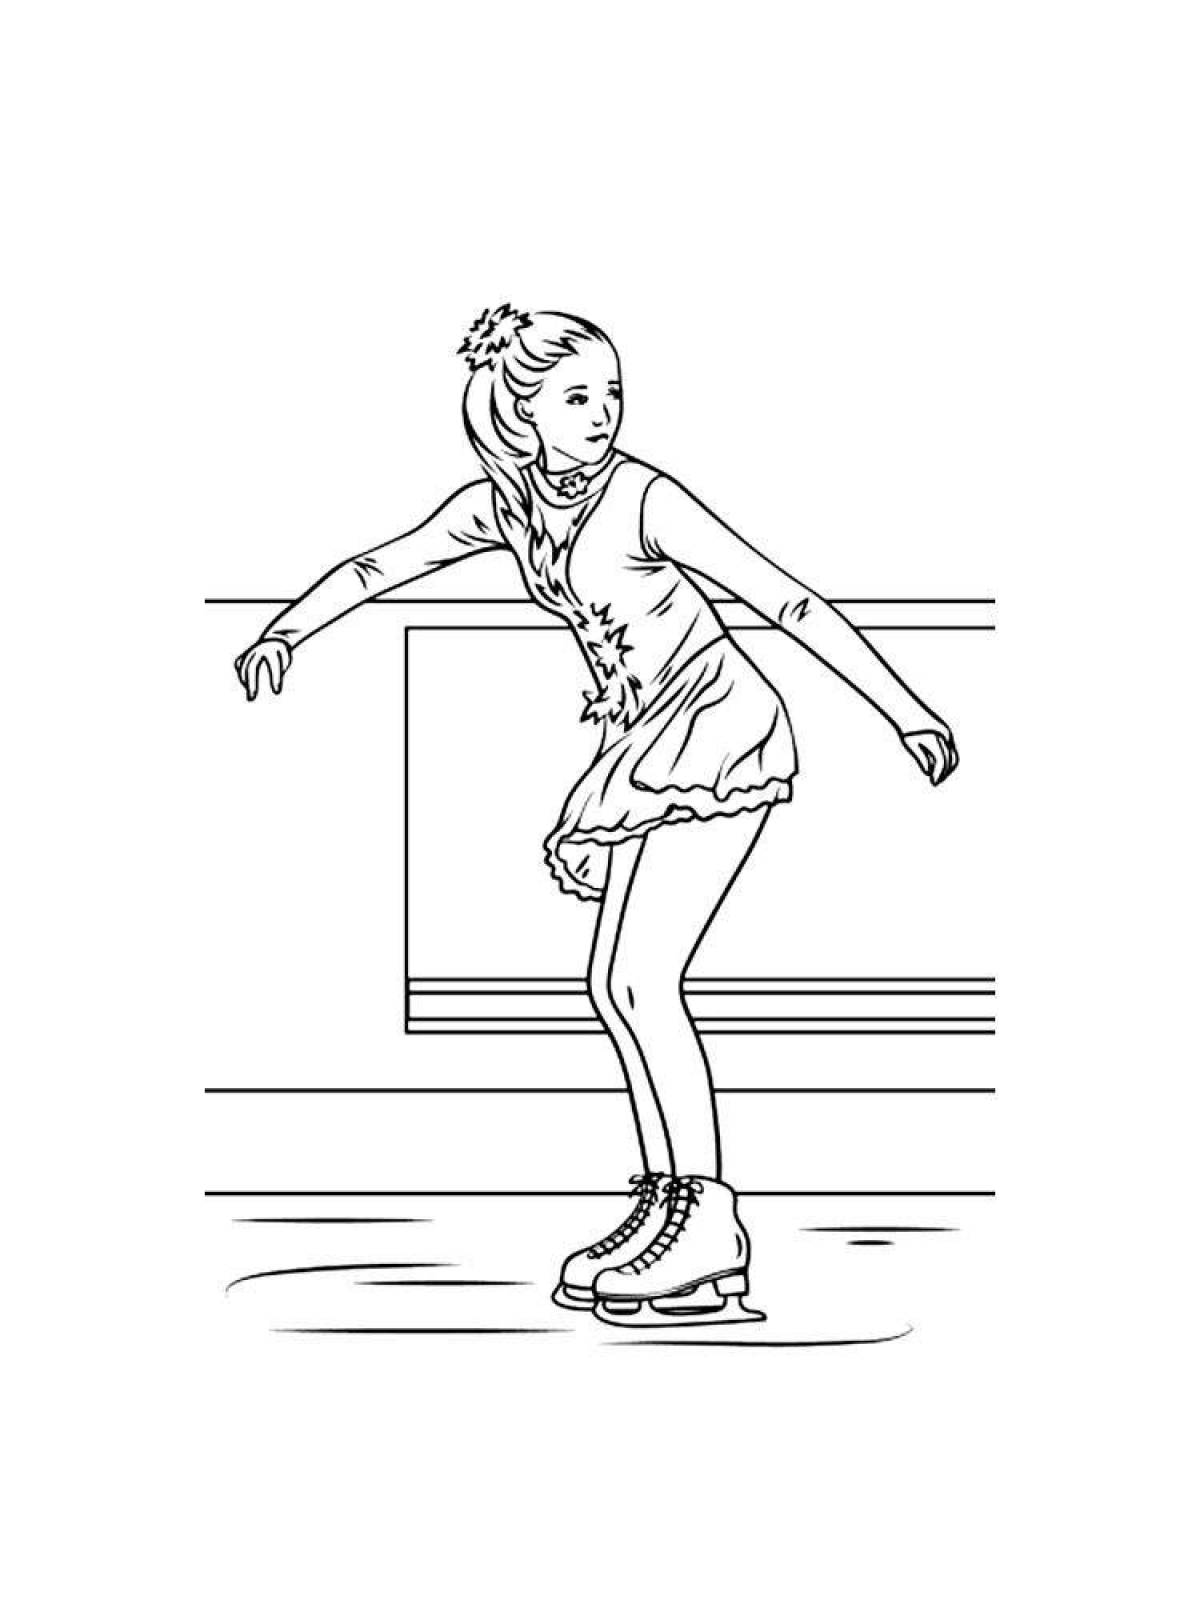 Radiant figure skating coloring page for kids